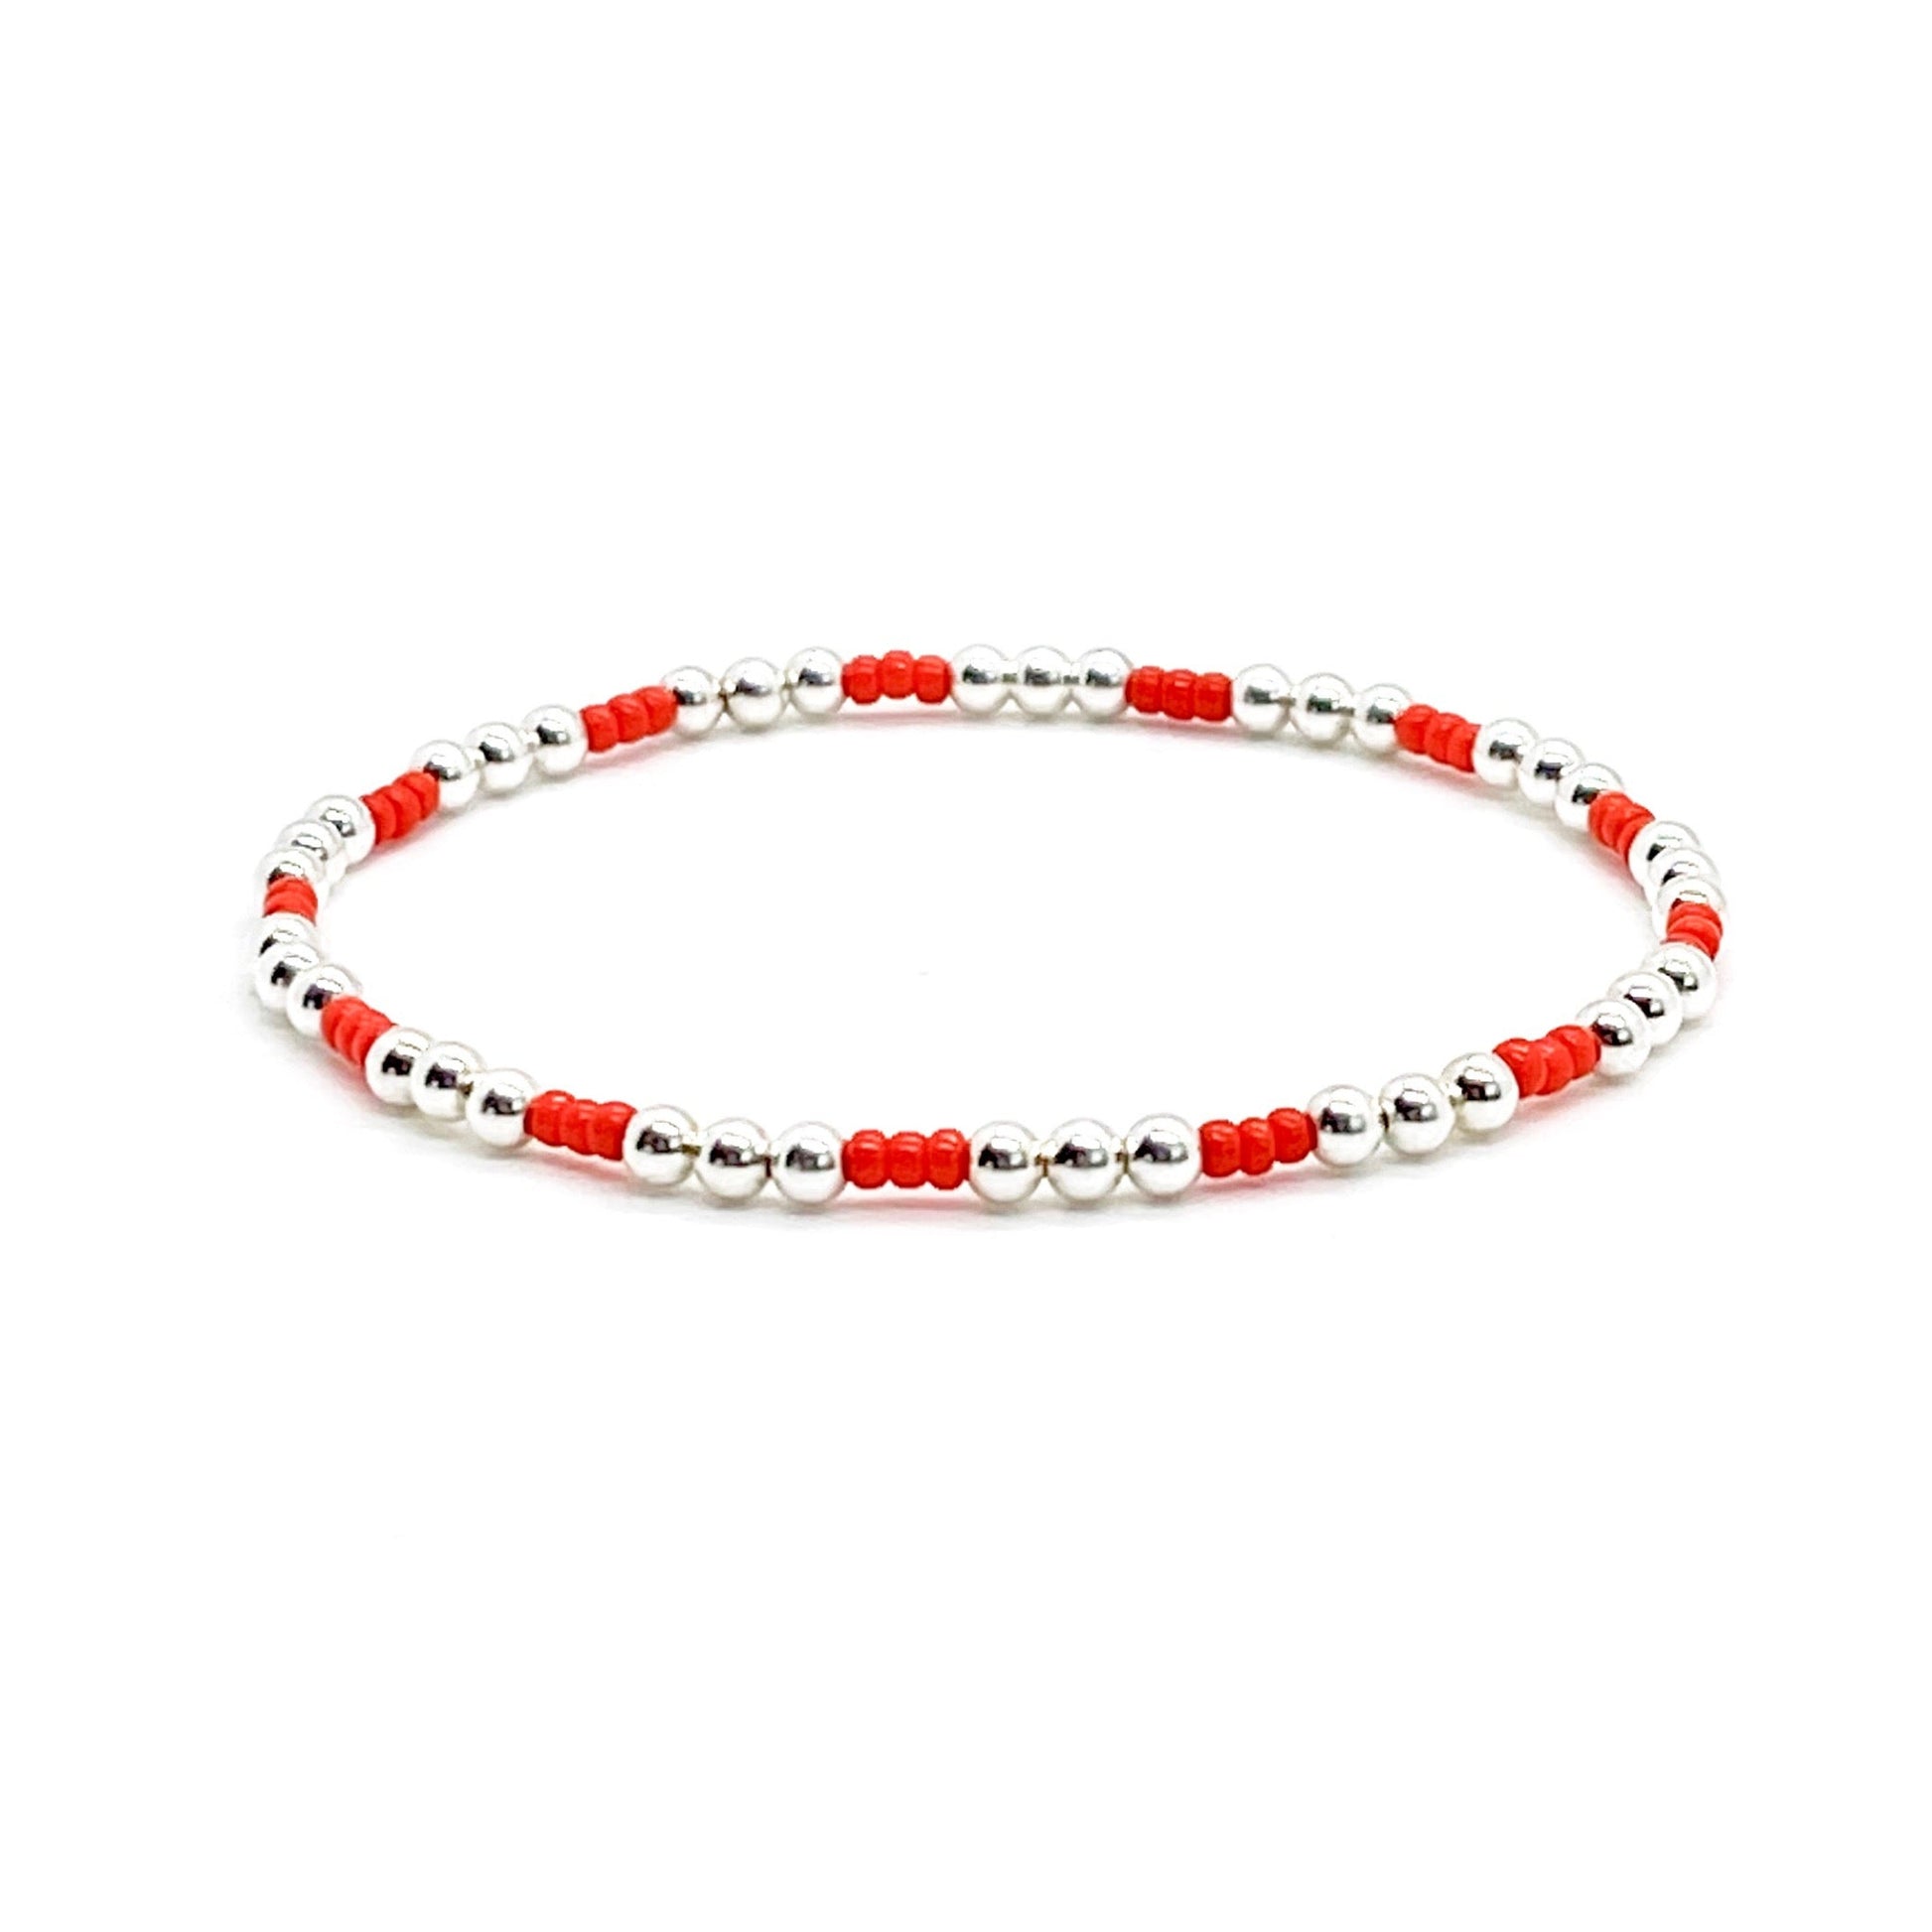 Red bead bracelet with sterling silver 3mm round beads on stretch cord.